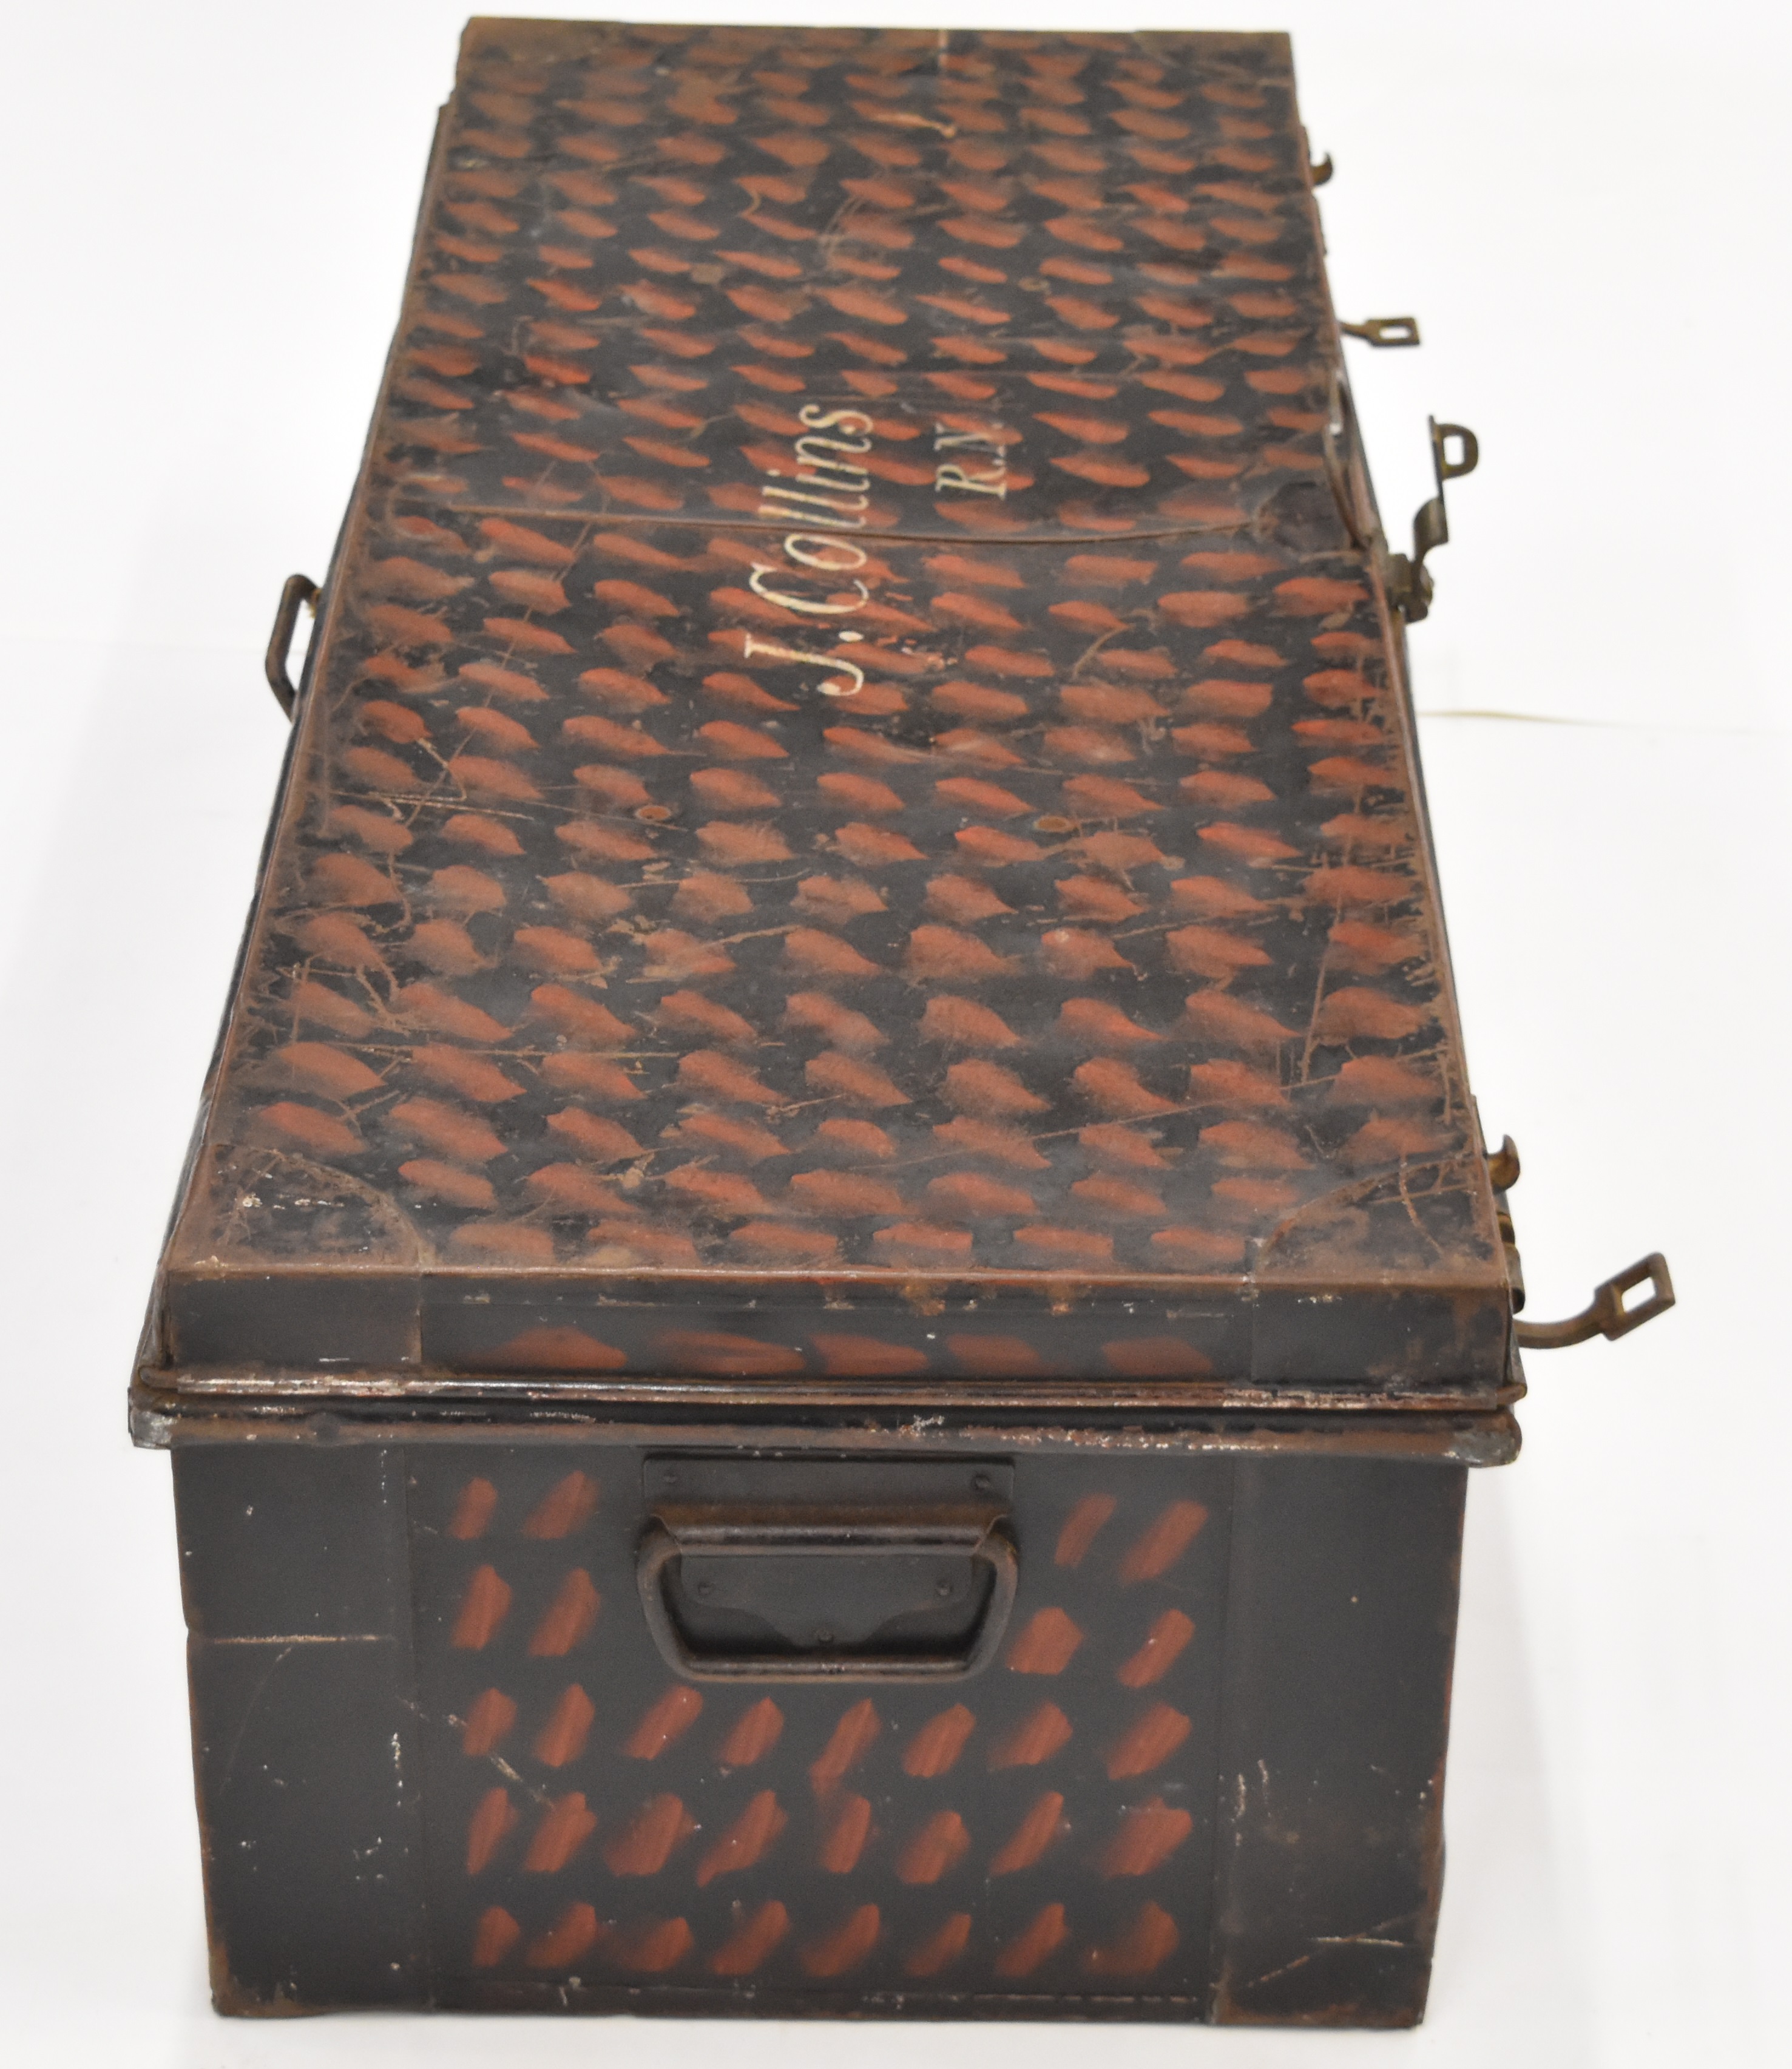 Royal Navy interest metal trunk with J Collins R.N to top, 105 x 36 x 26cm - Image 4 of 4